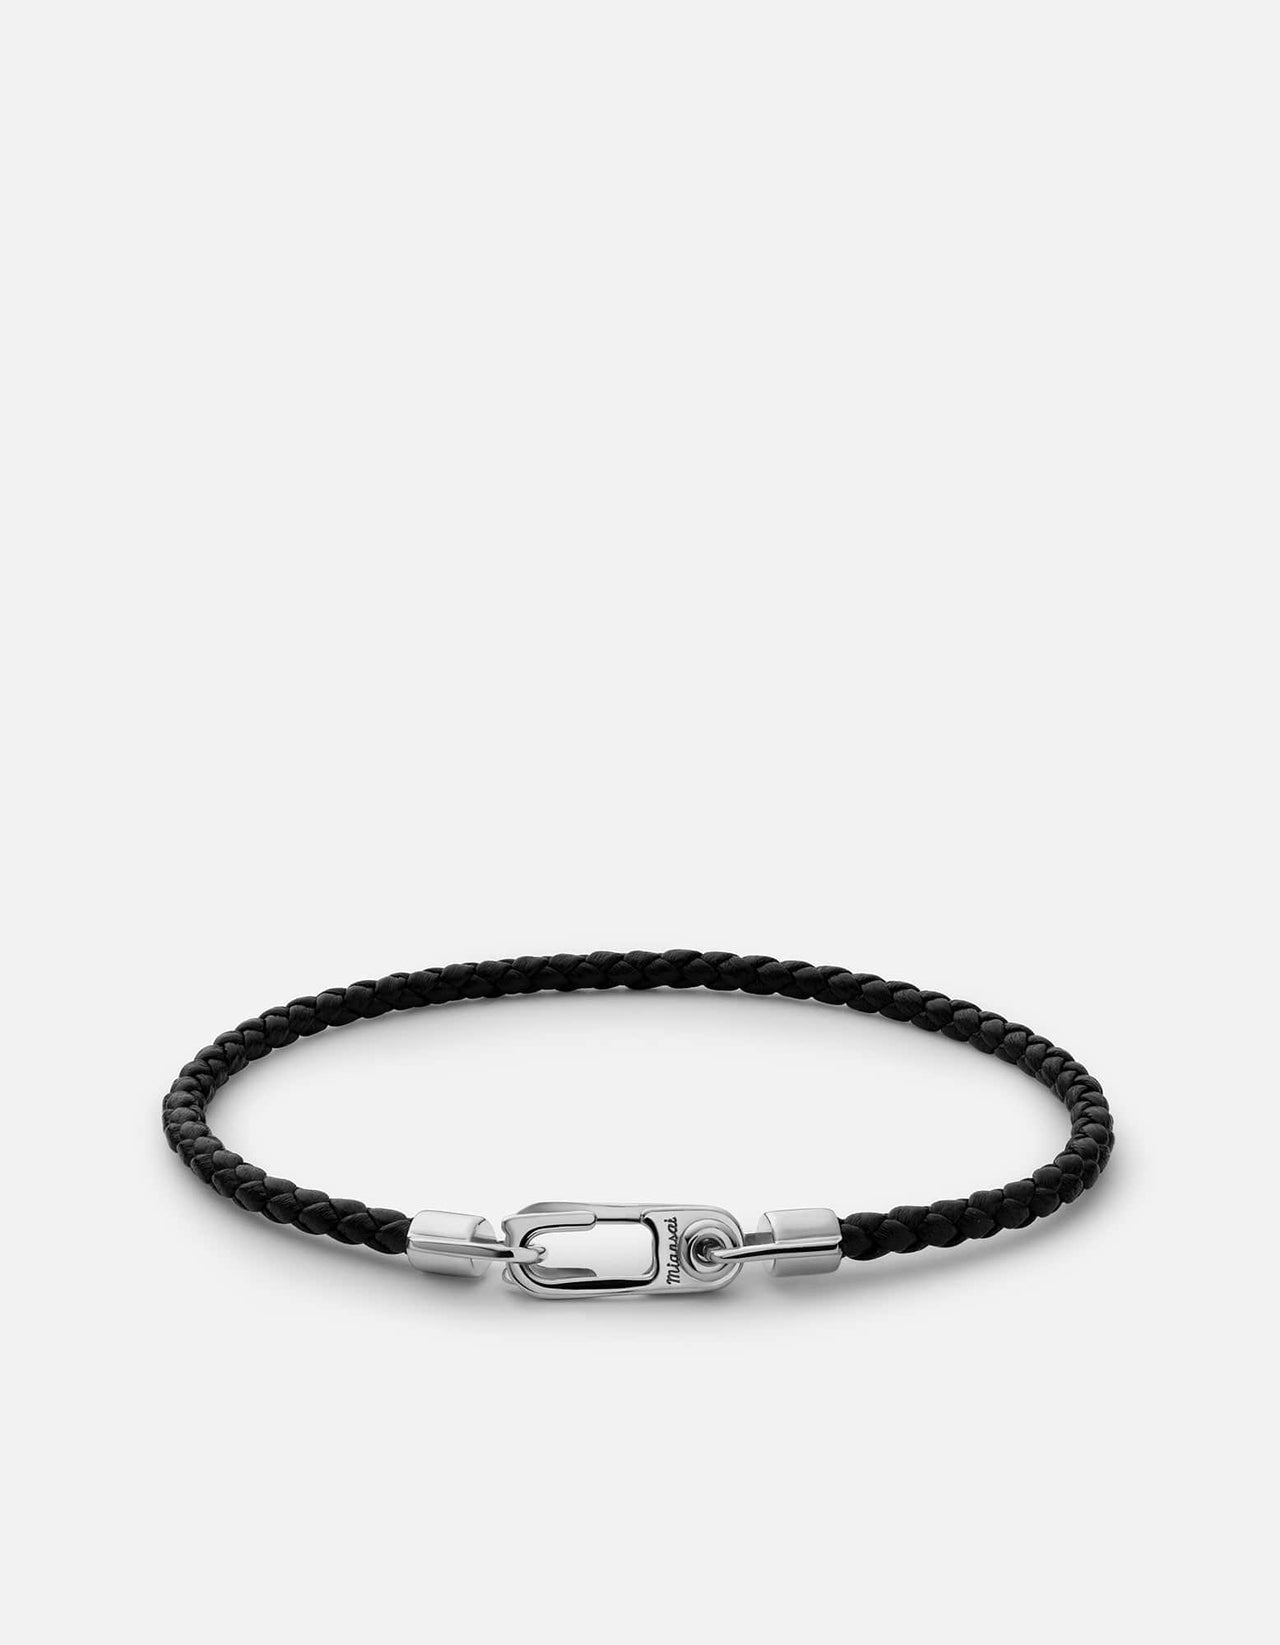 The Annex Leather Bracelet, Sterling Silver is placed in a white surface and has a unique lock feature